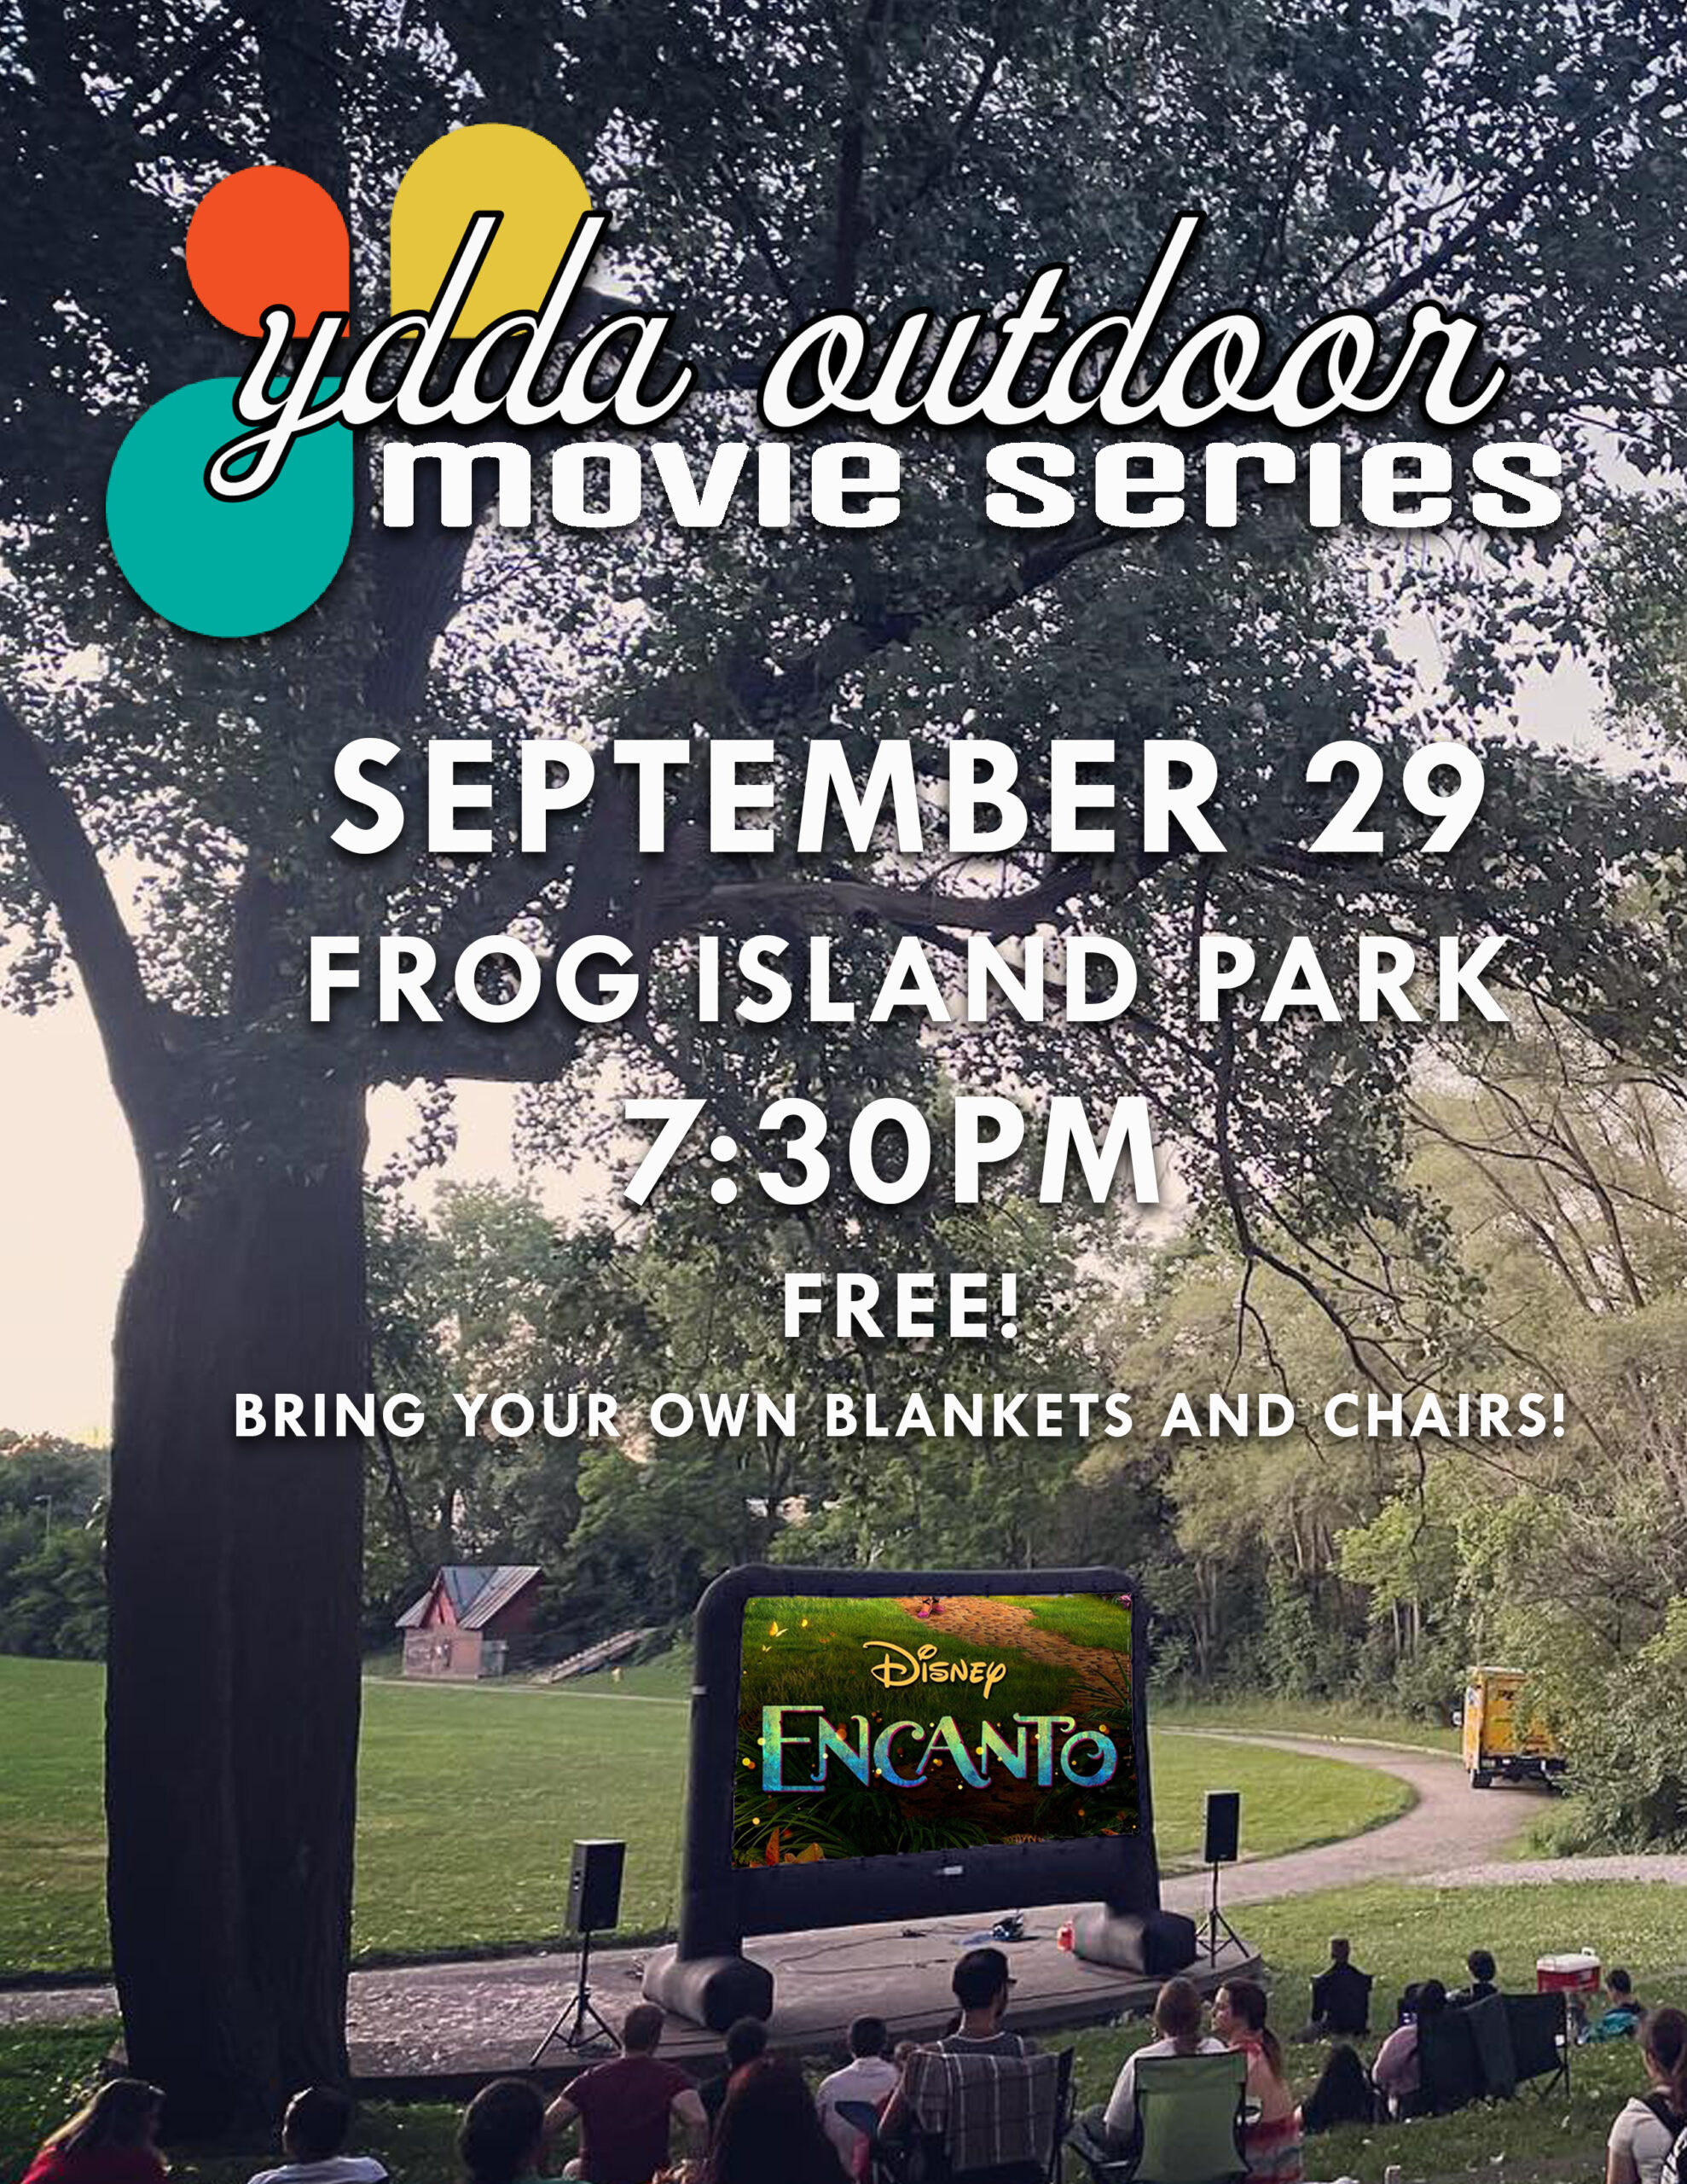 Encanto on the screen at frog island park